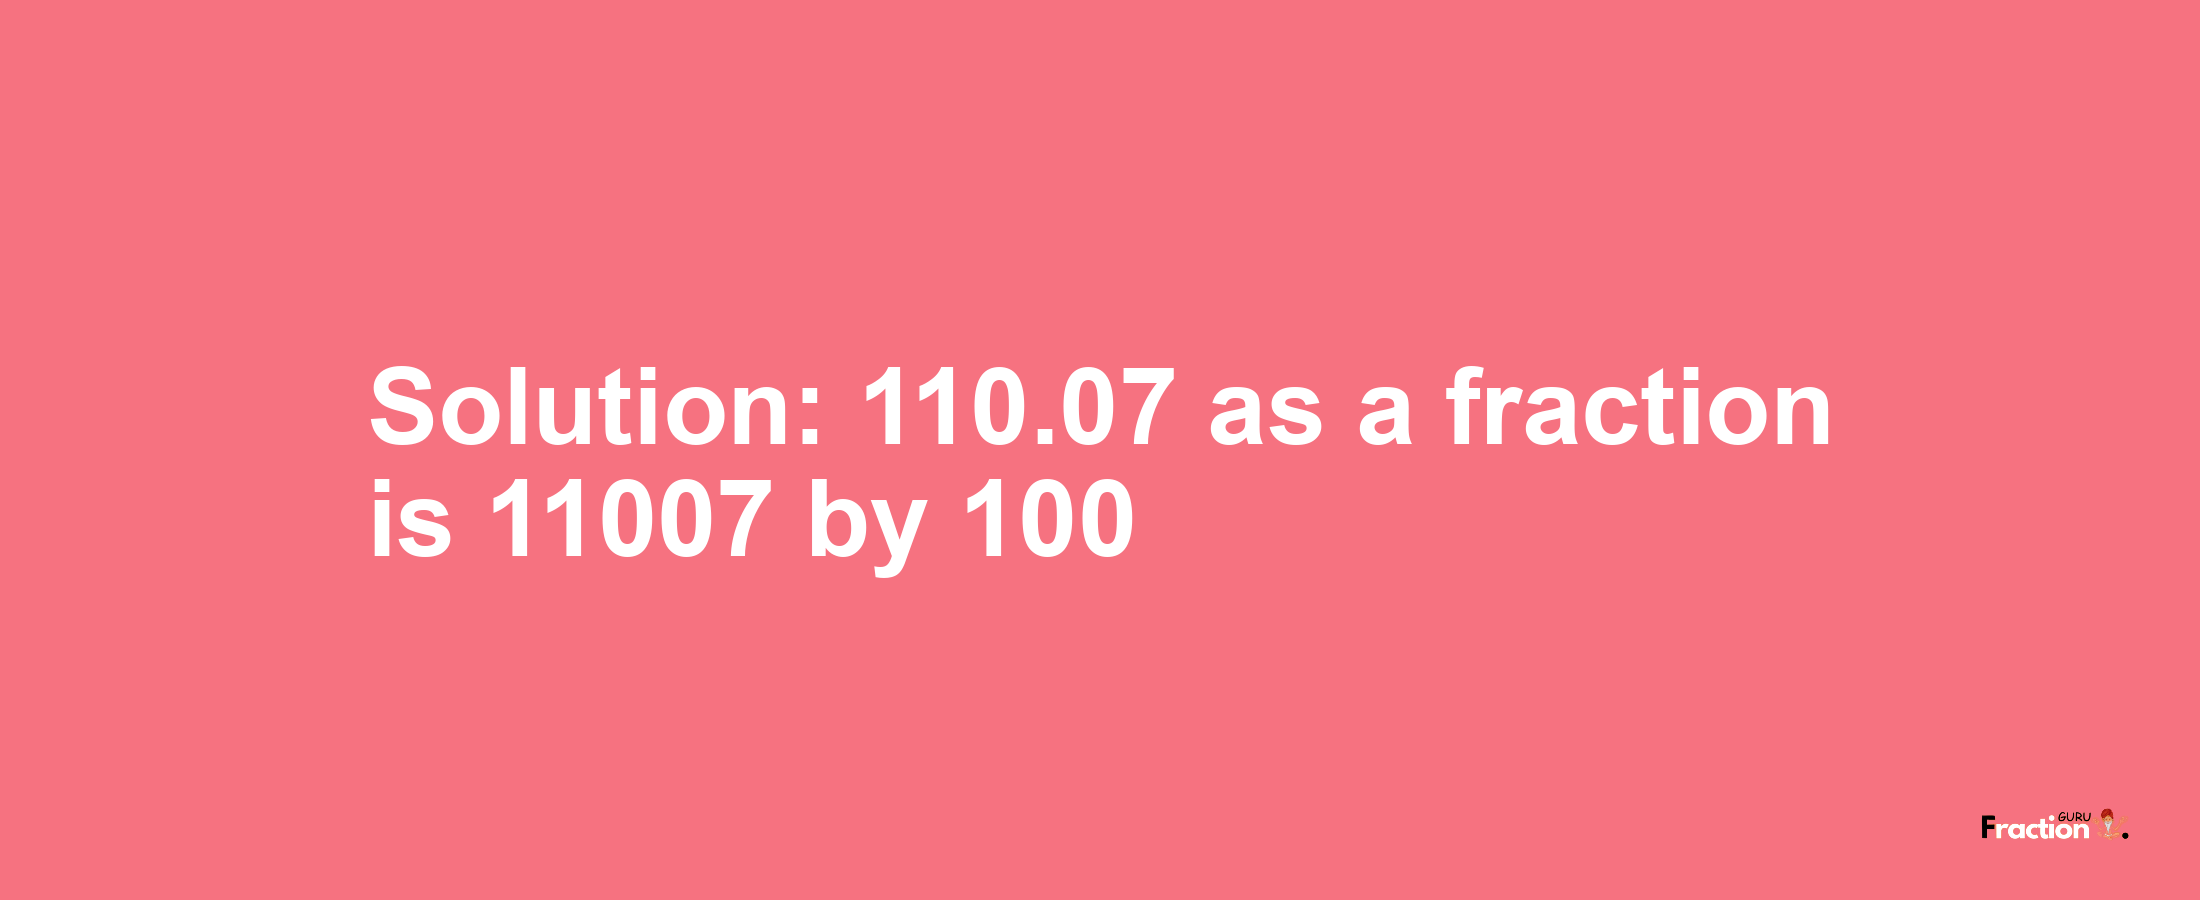 Solution:110.07 as a fraction is 11007/100